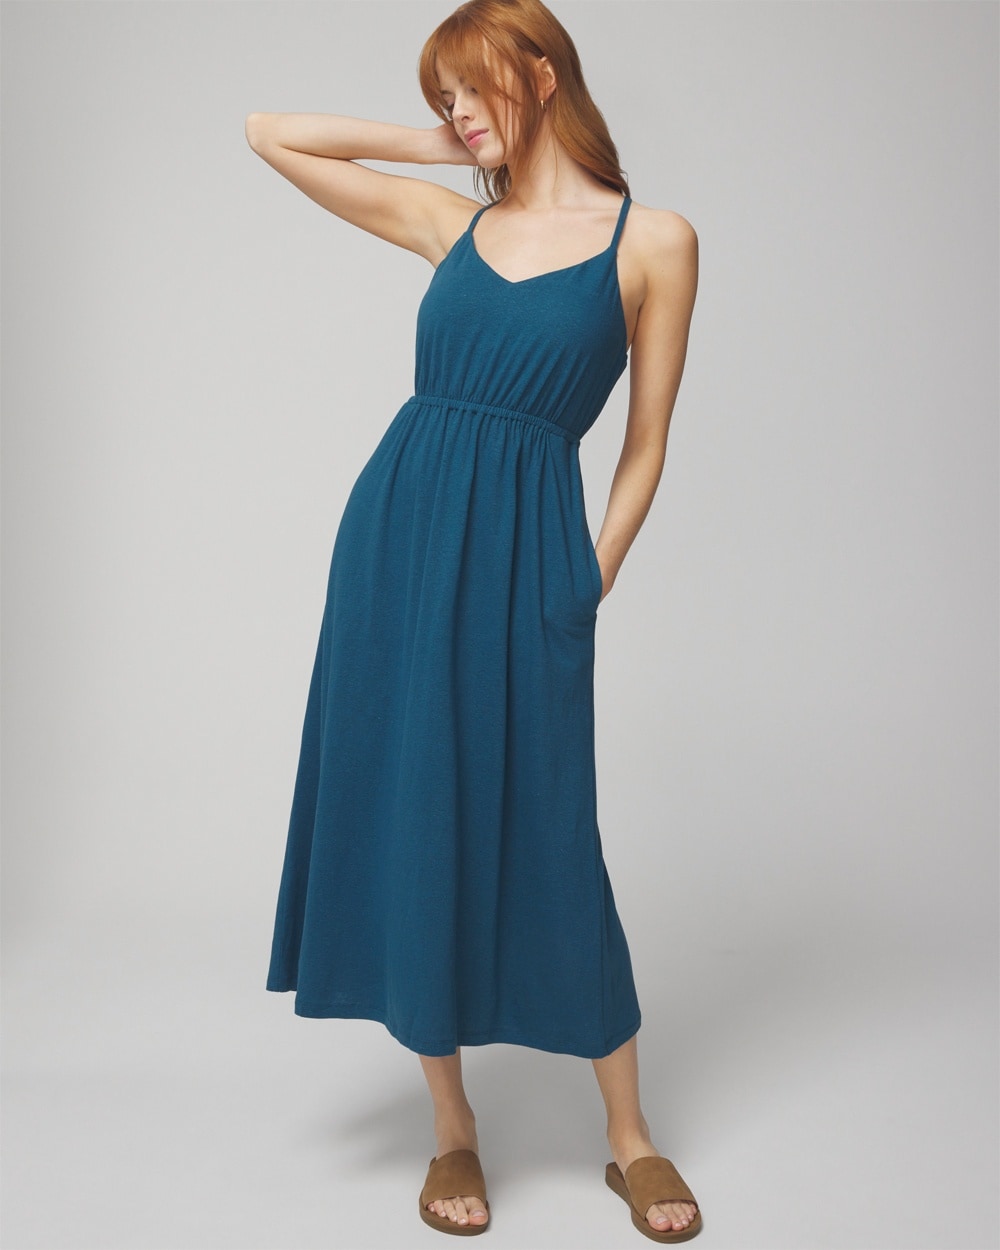 Shop Soma Women's Linen Jersey Midi Sundress With Built-in Bra In Timeless Blue Size Small |